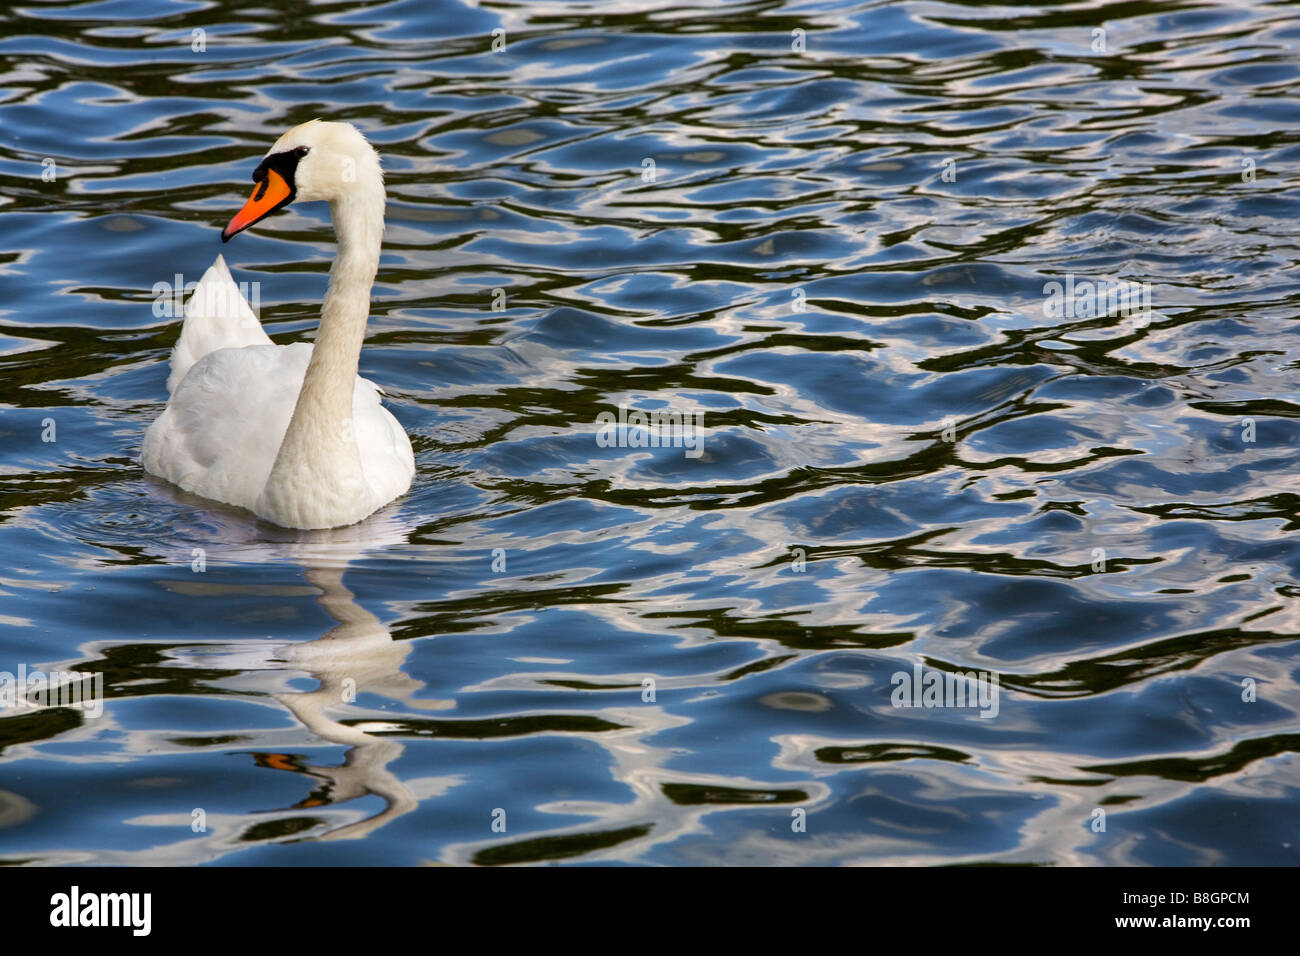 A swan on the Serpentine lake in Hyde Park, London, UK Stock Photo